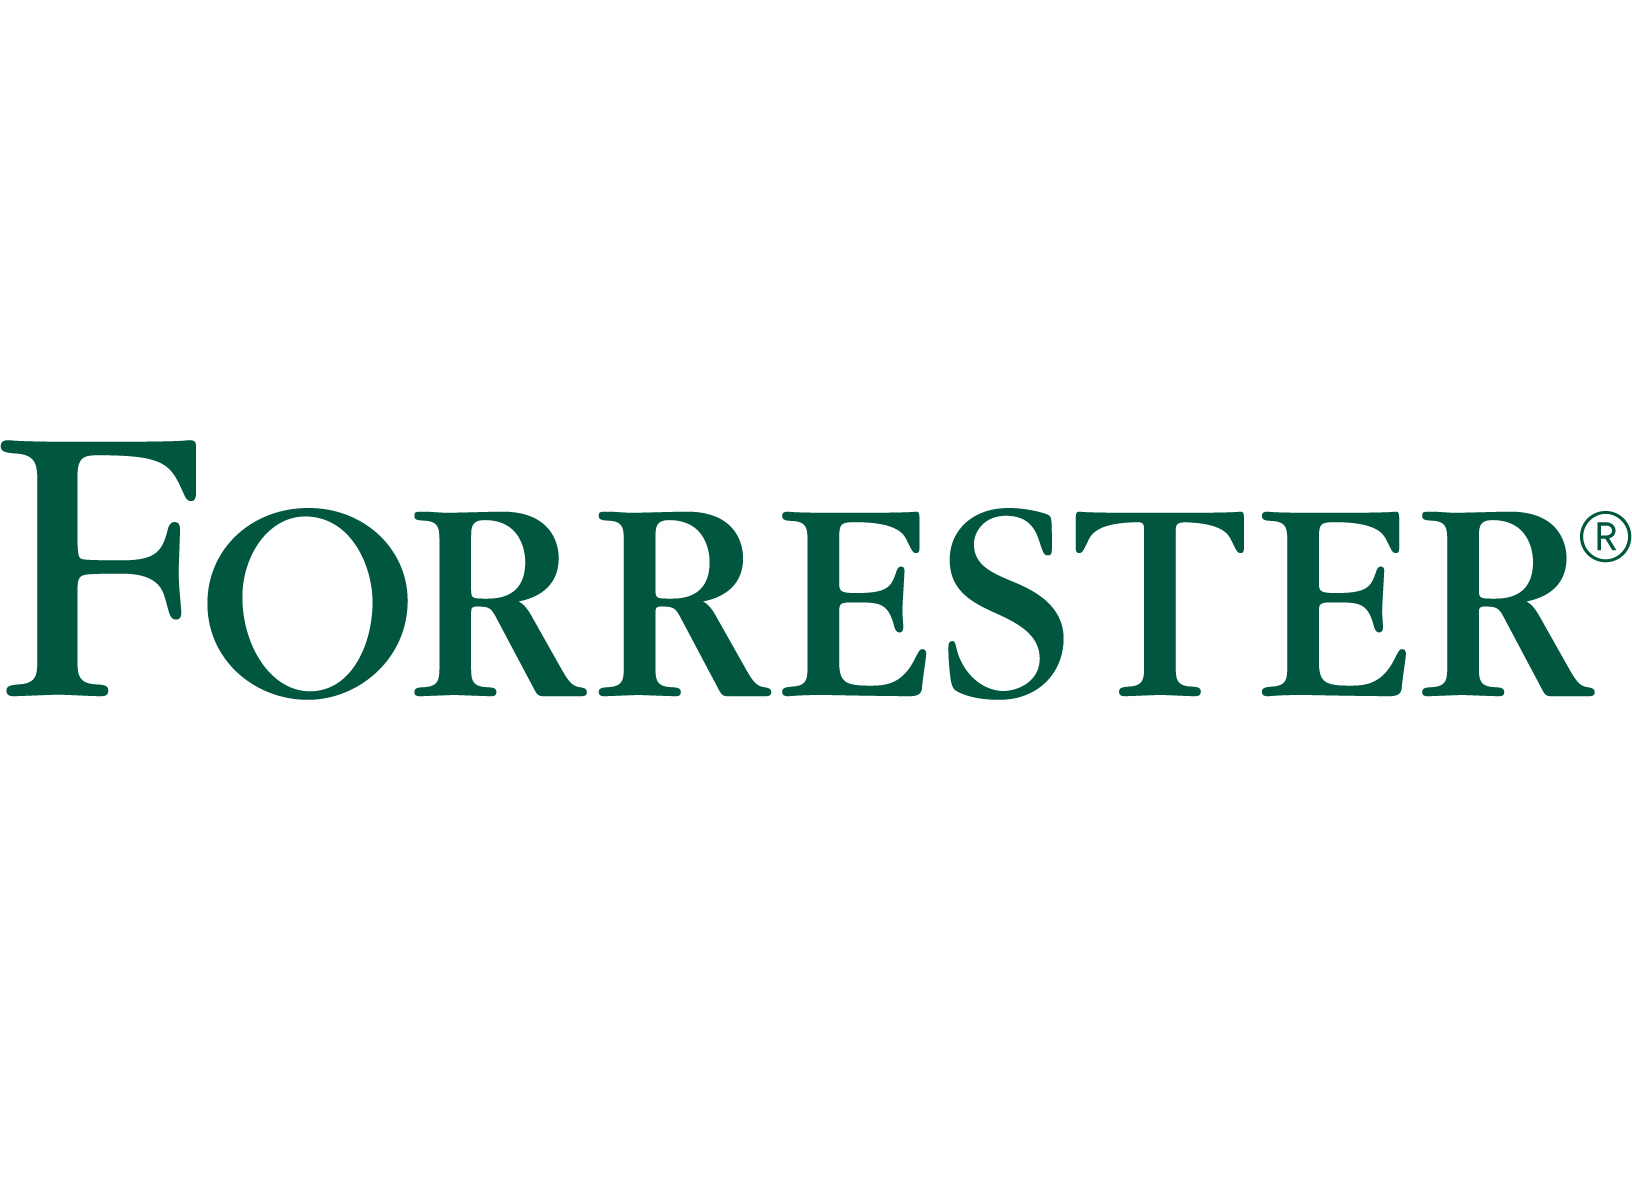 Forrester analysts share 5 shocking cybersecurity predictions for 2023